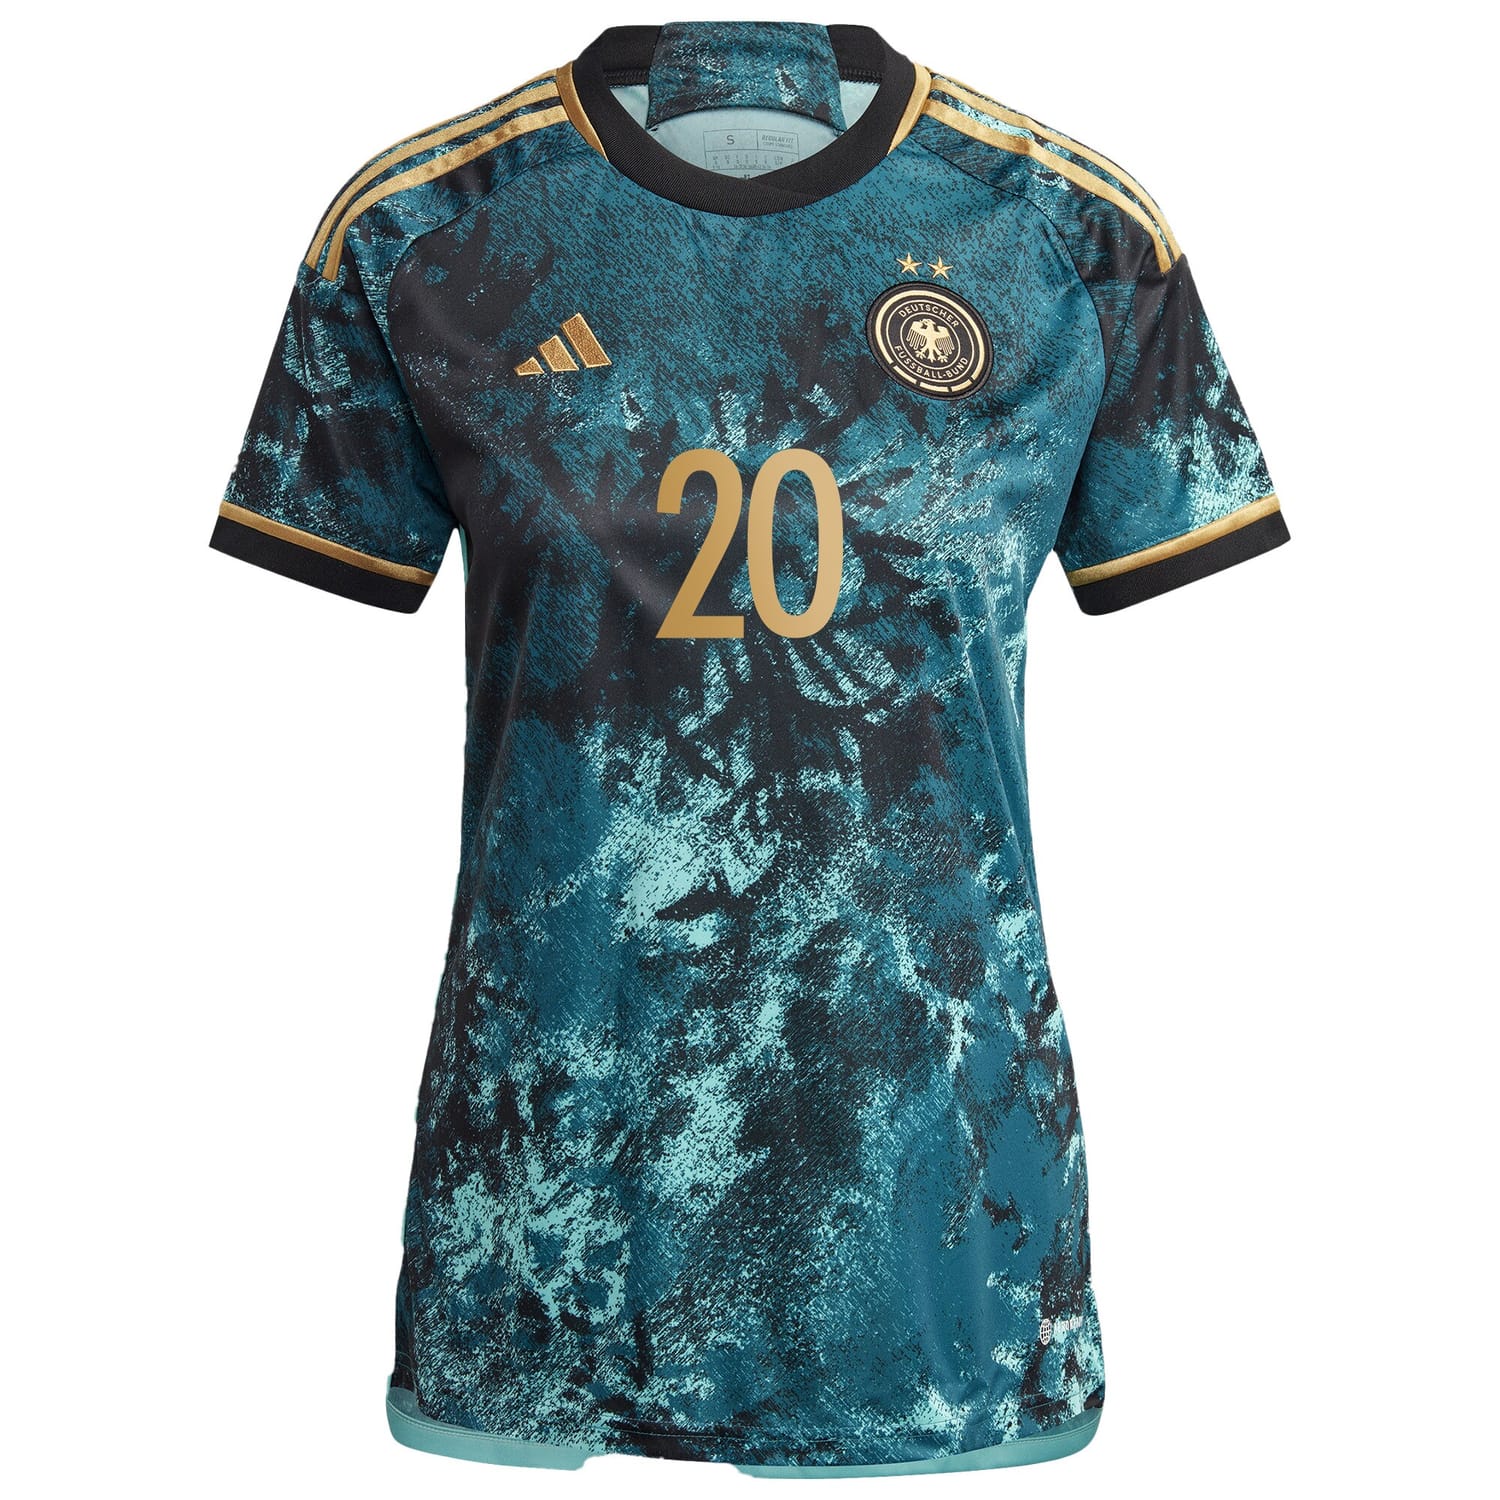 Germany National Team Away Jersey Shirt 2023 player Lina Magull 20 printing for Women